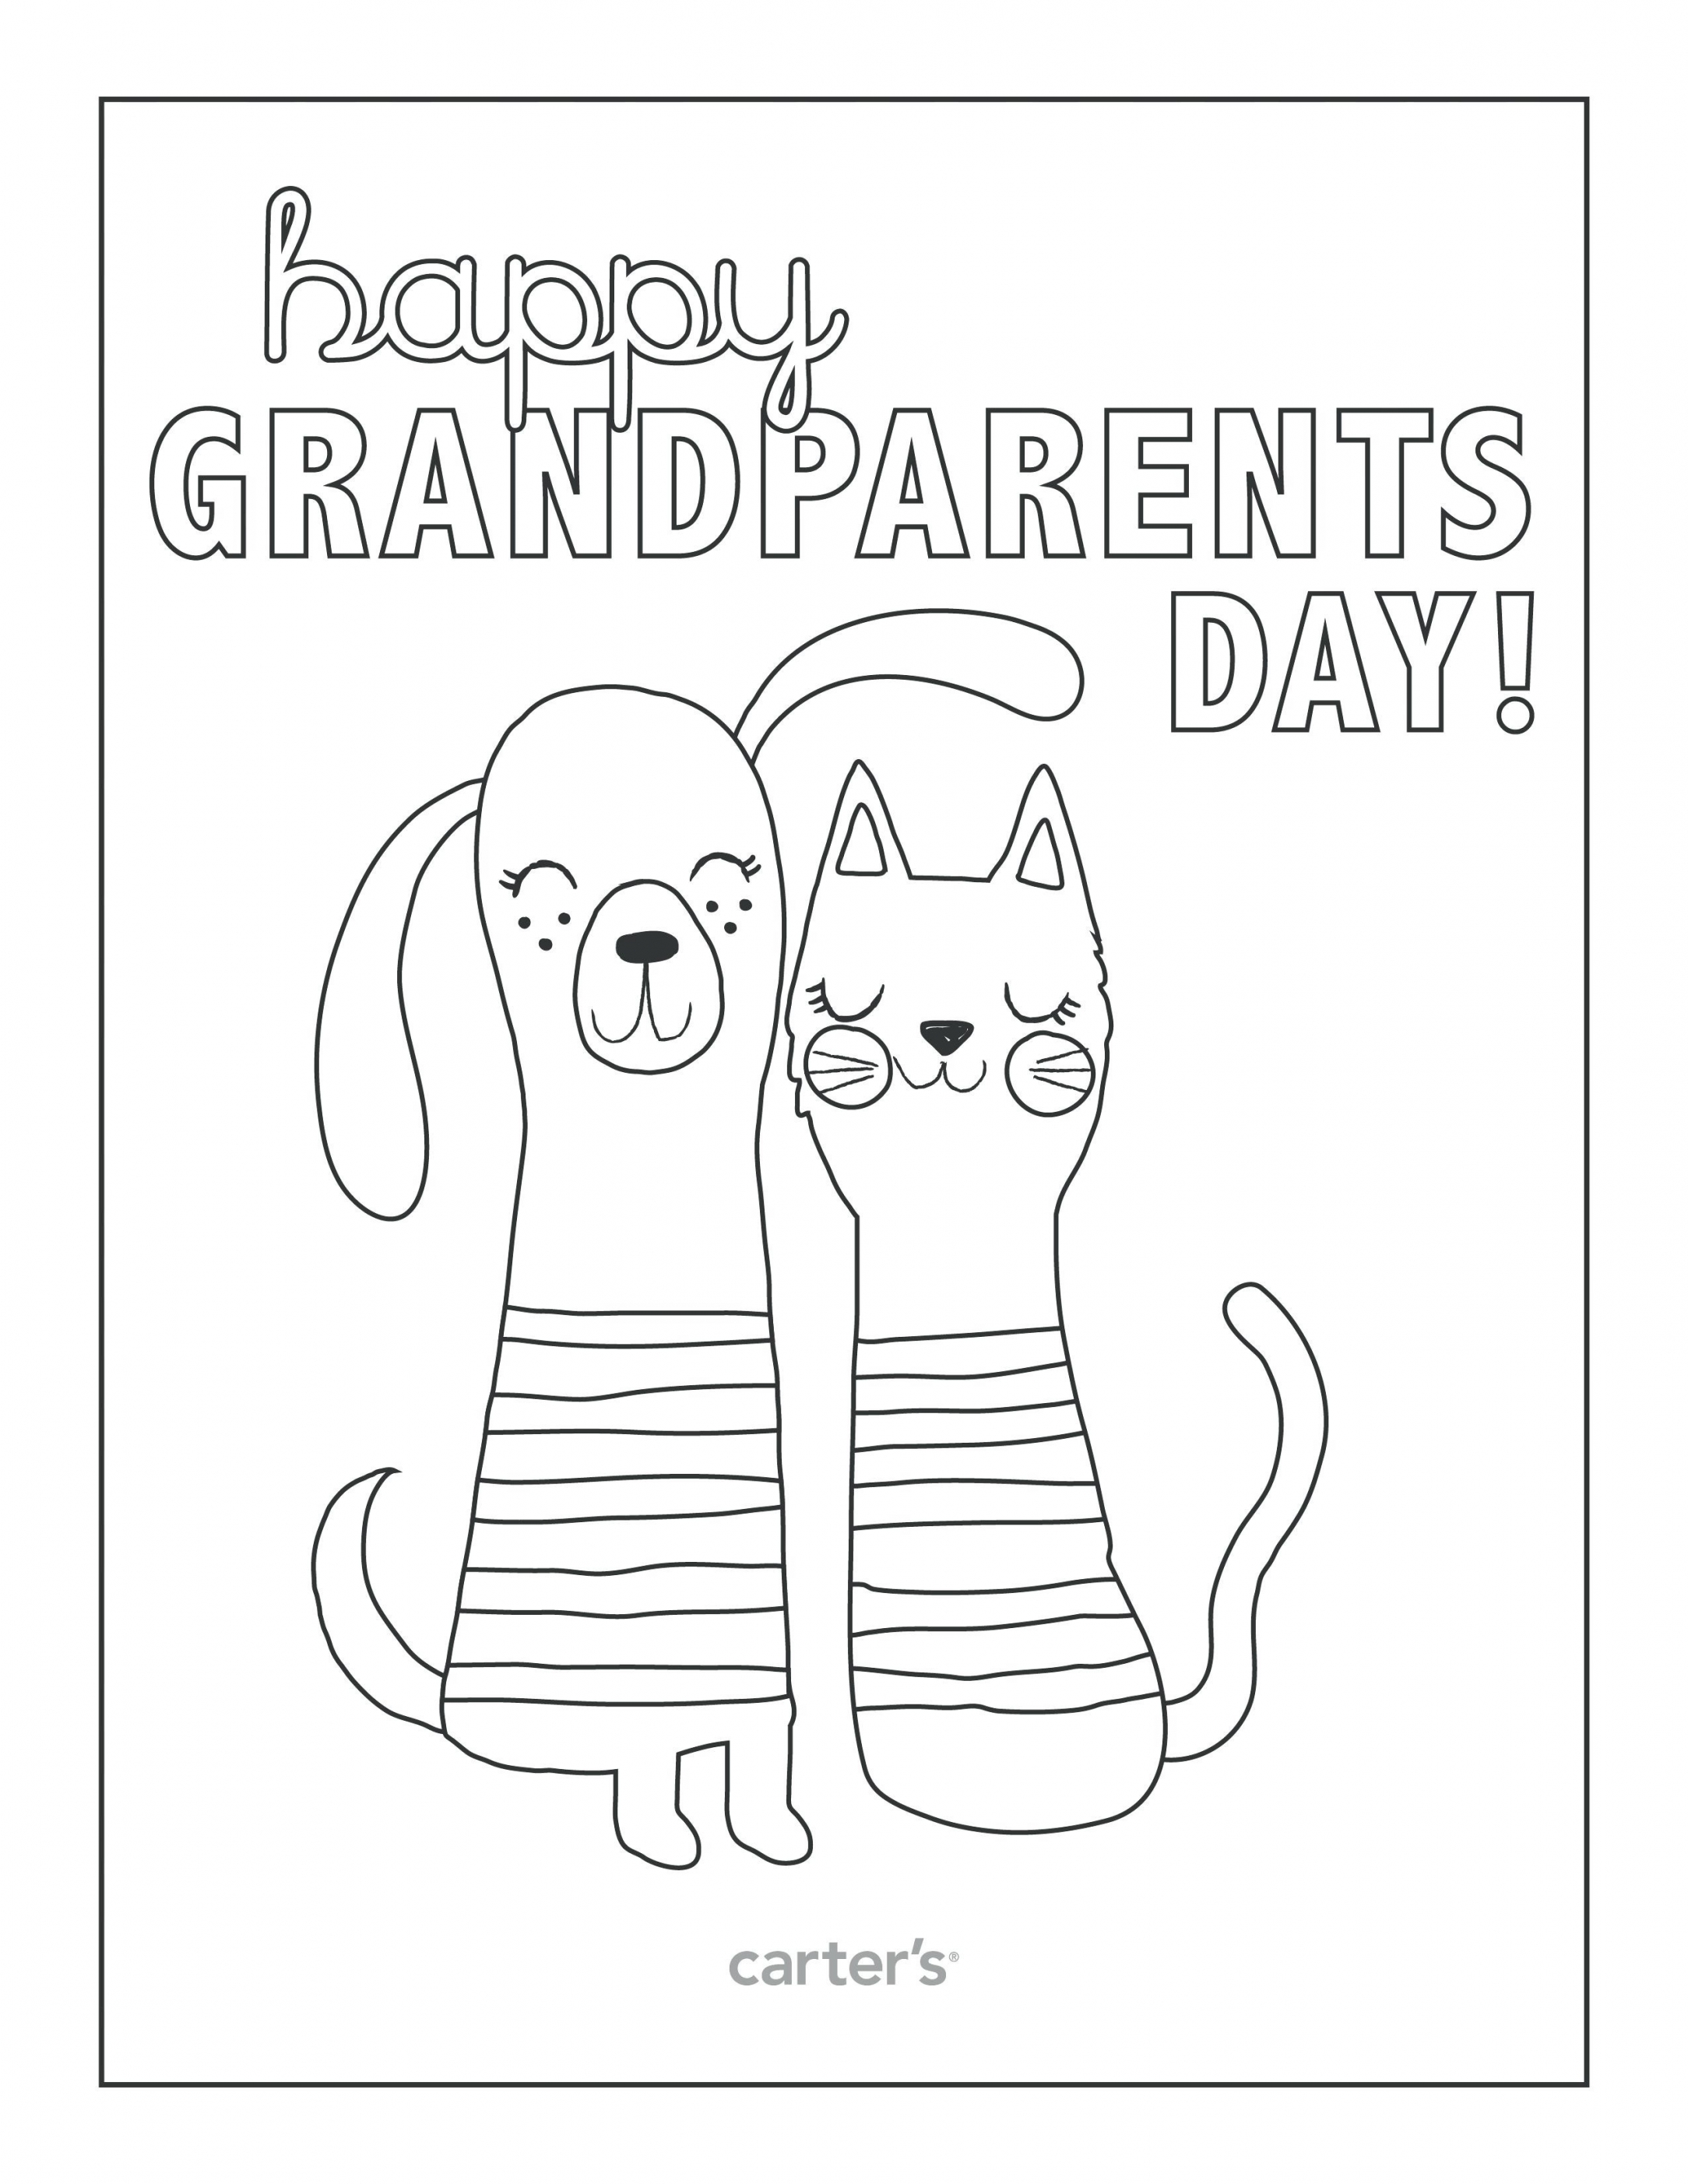 Download Grandparents Day Coloring Pages Best Coloring Pages For Kids